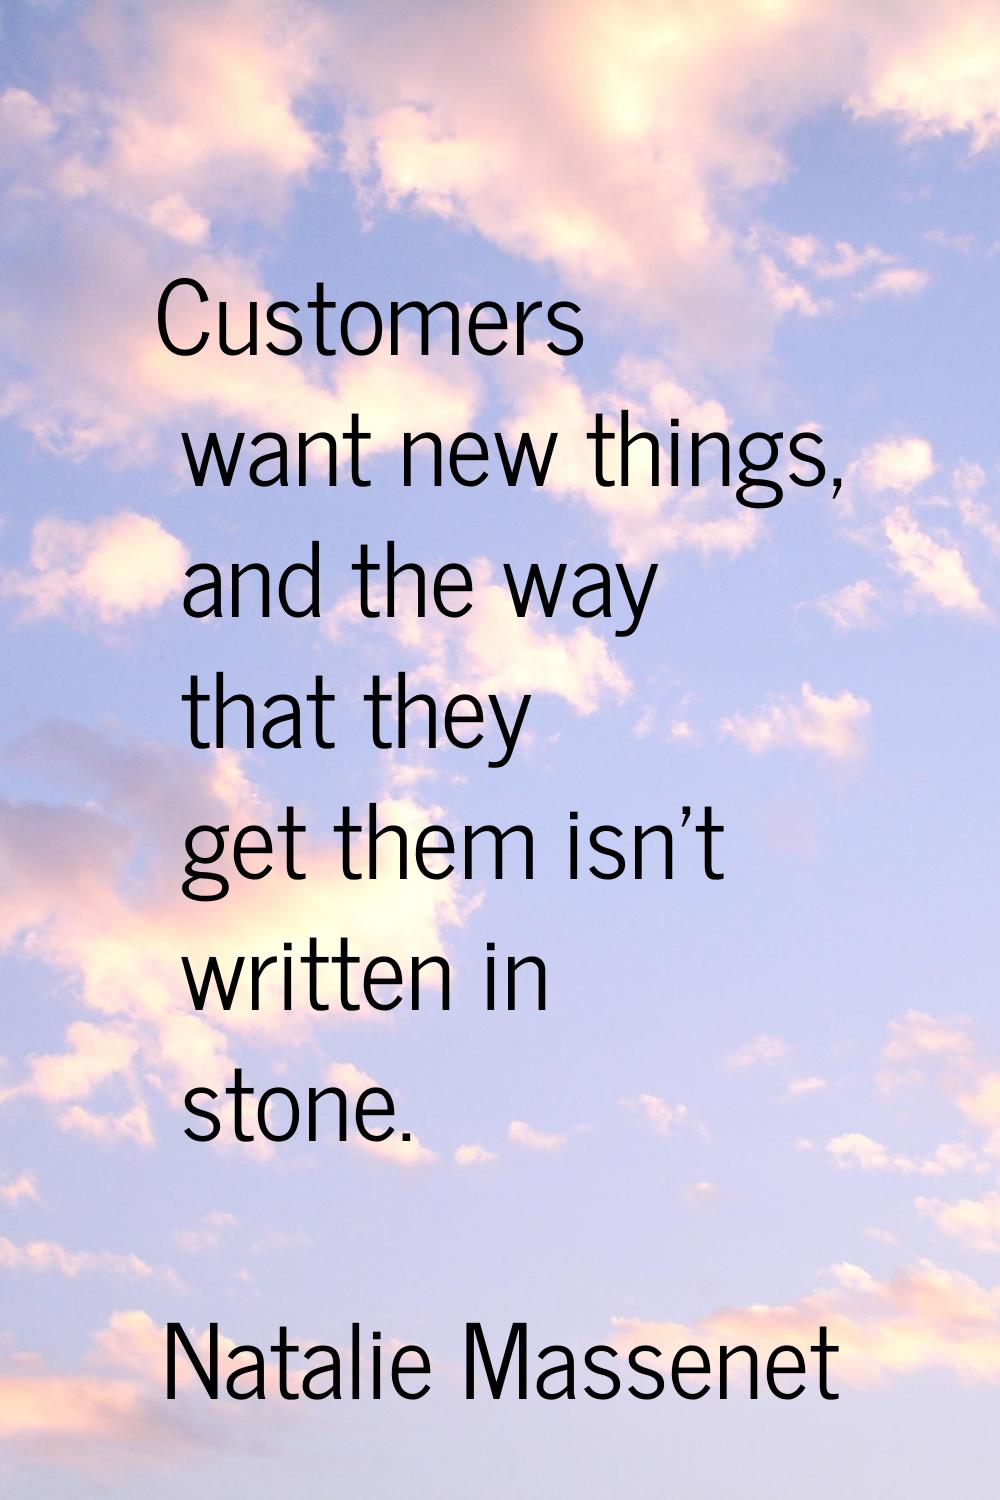 Customers want new things, and the way that they get them isn't written in stone.